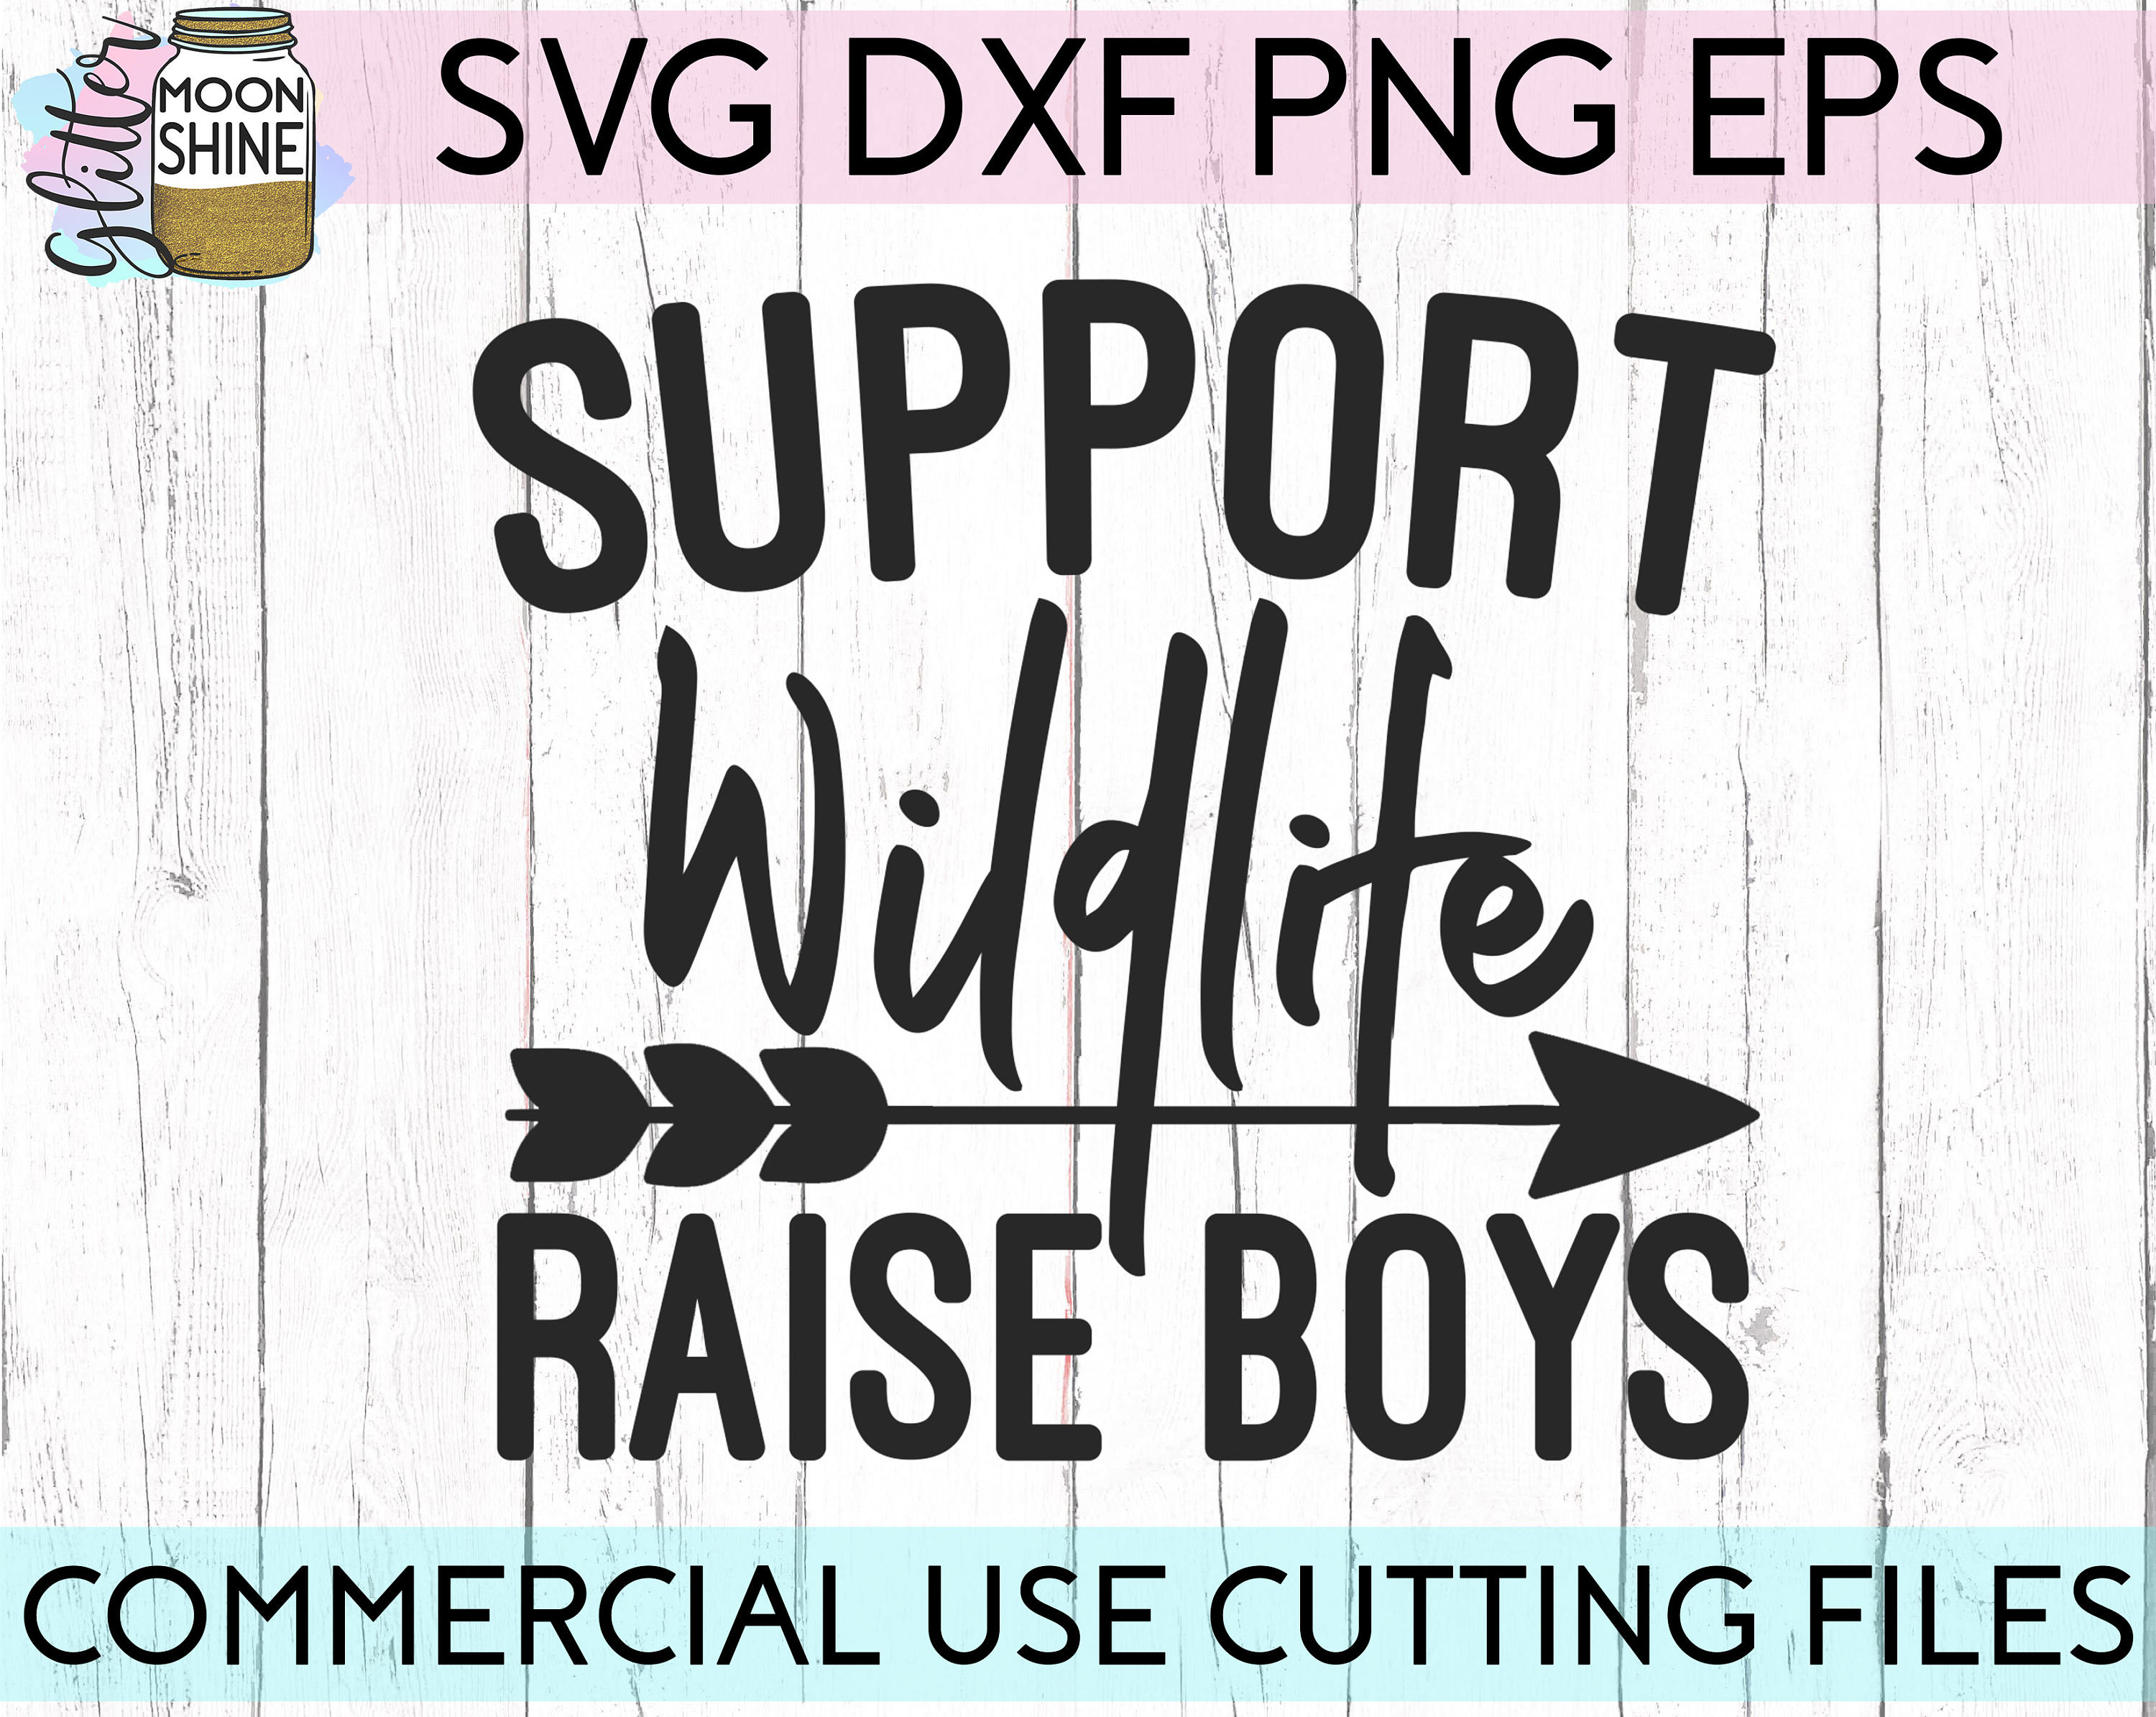 Download Support Wildlife Raise Boys svg eps dxf png Files for Cutting